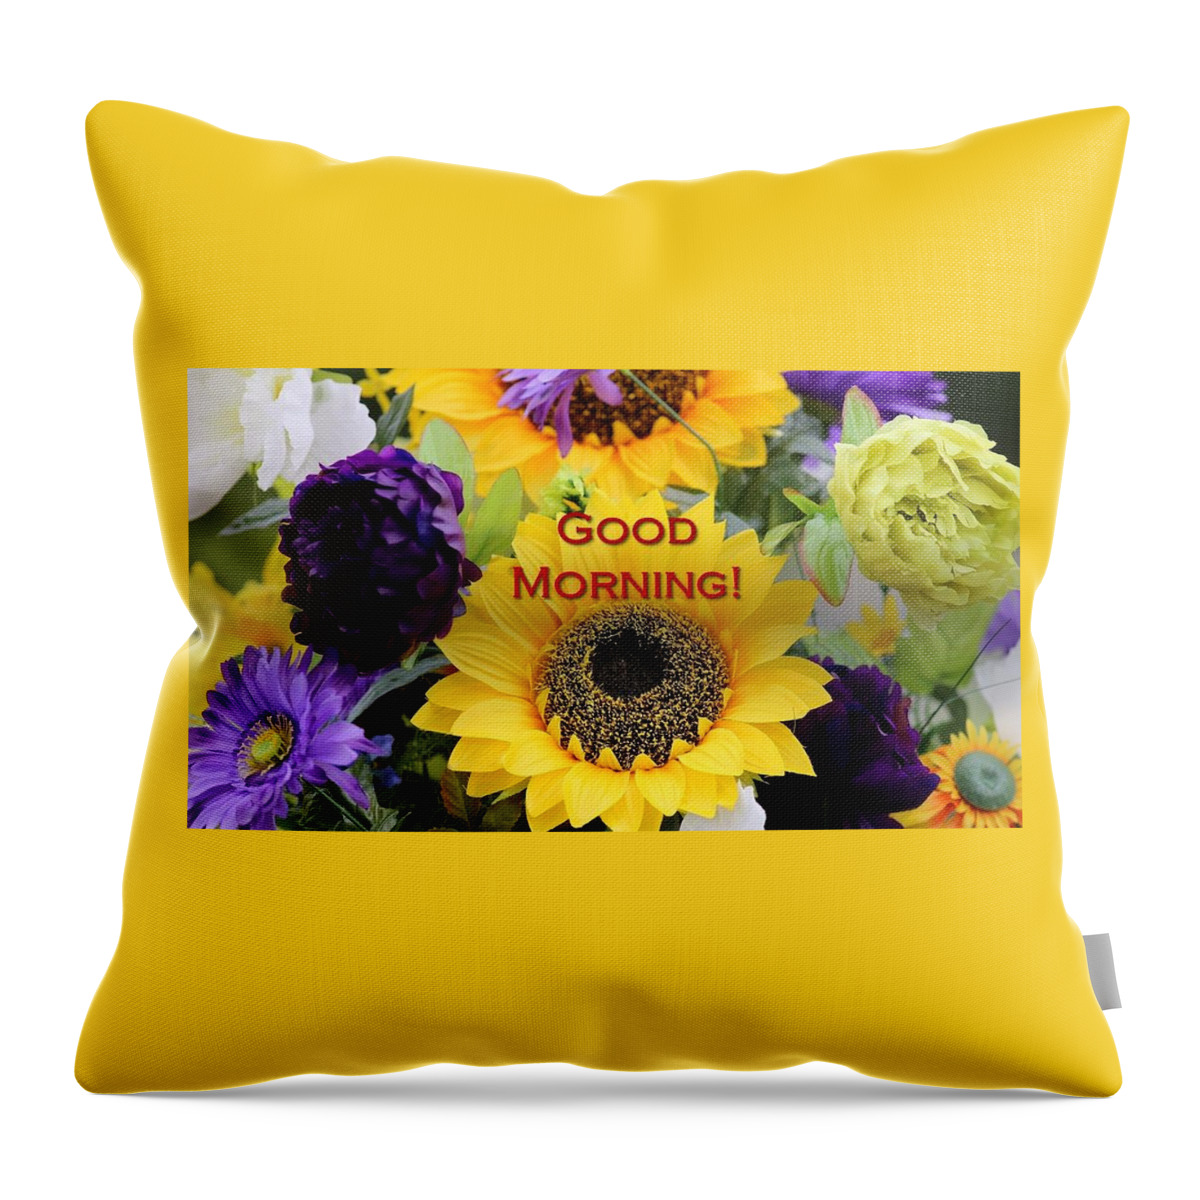 Nancy's Novelty Pixels Photos & AI - Good Morning Throw Pillow featuring the photograph Sunflowers Bid Good Morning by Nancy Ayanna Wyatt And Danny Pendleton